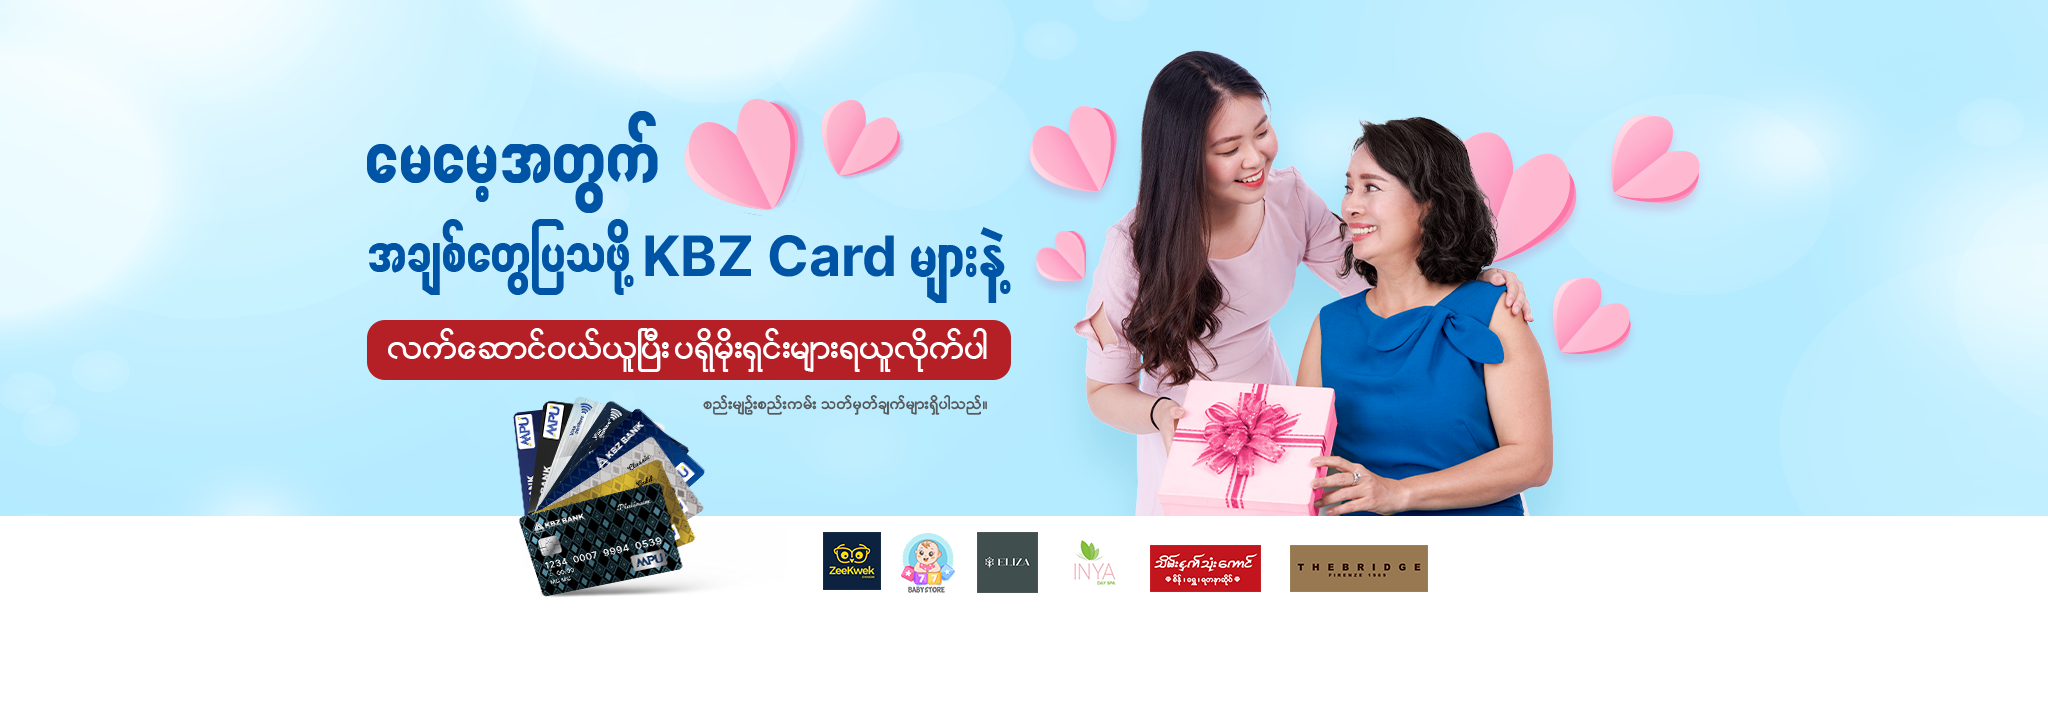 KBZ Bank Mother's Day